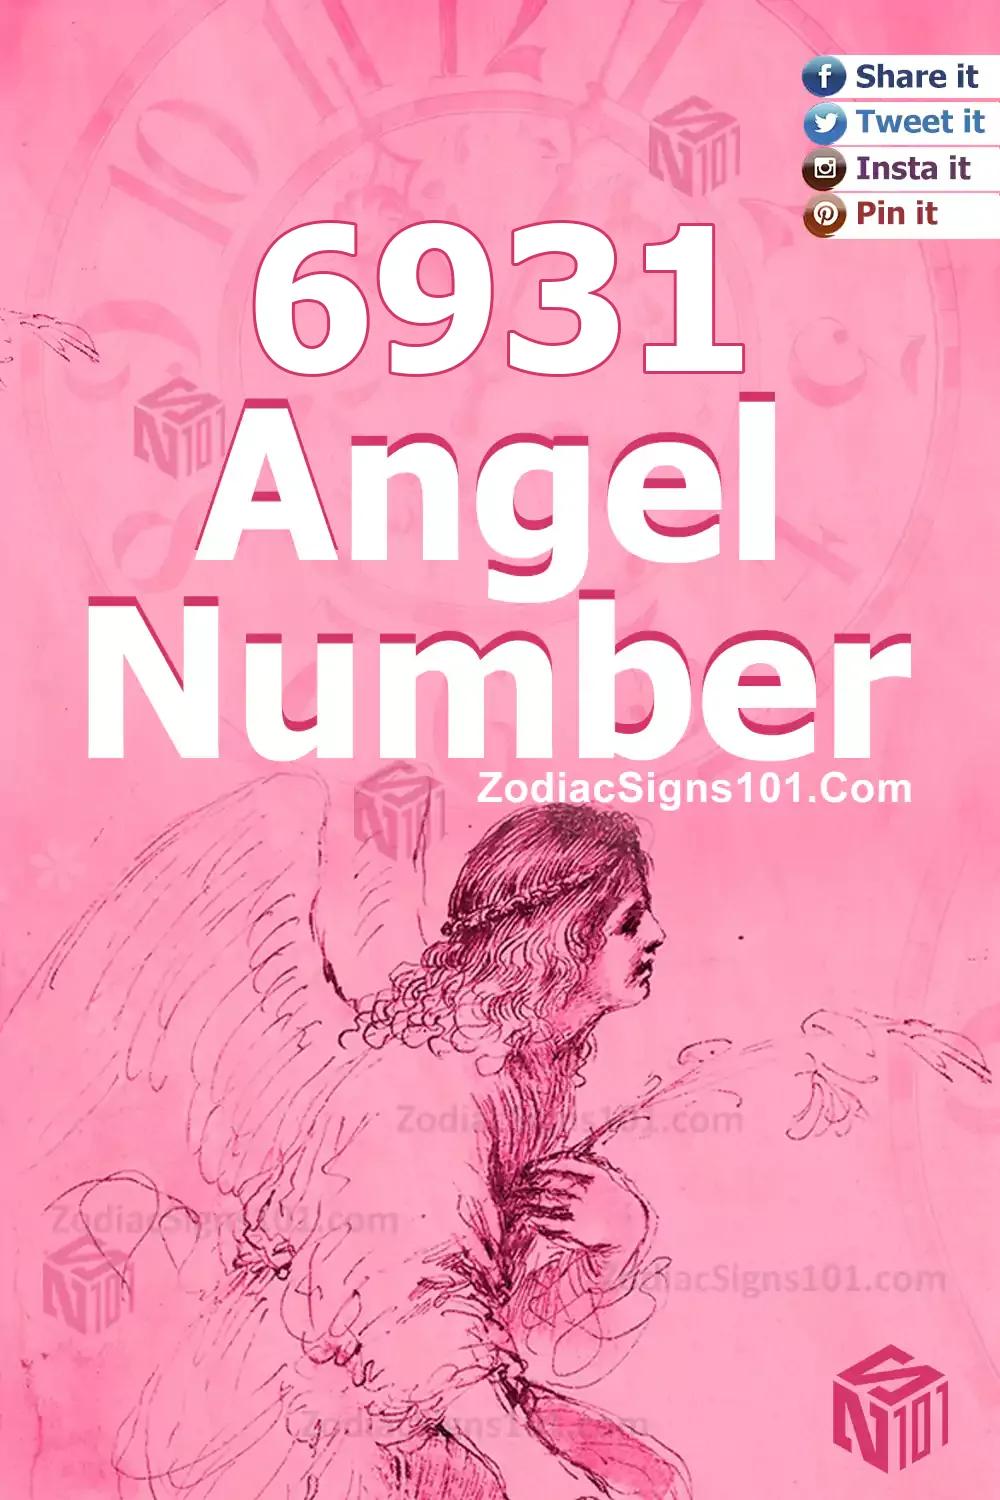 6931 Angel Number Meaning